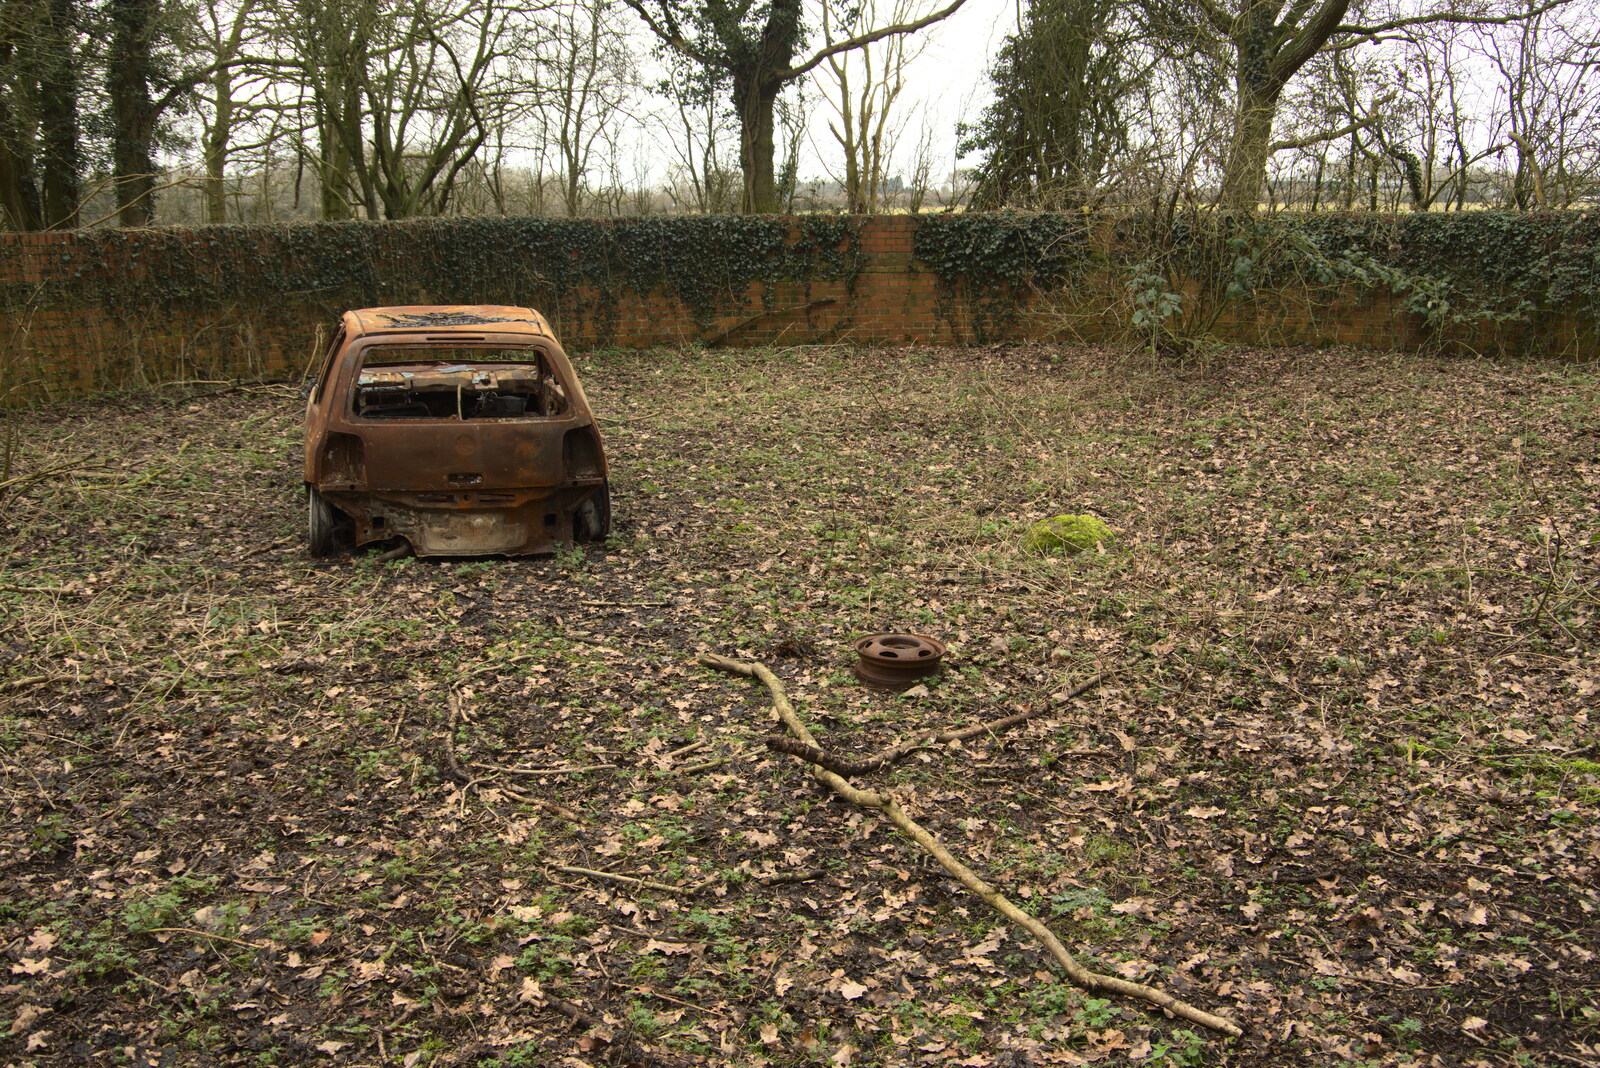 The derelict car from The Old Sewage Works, The Avenue, Brome, Suffolk - 20th February 2021